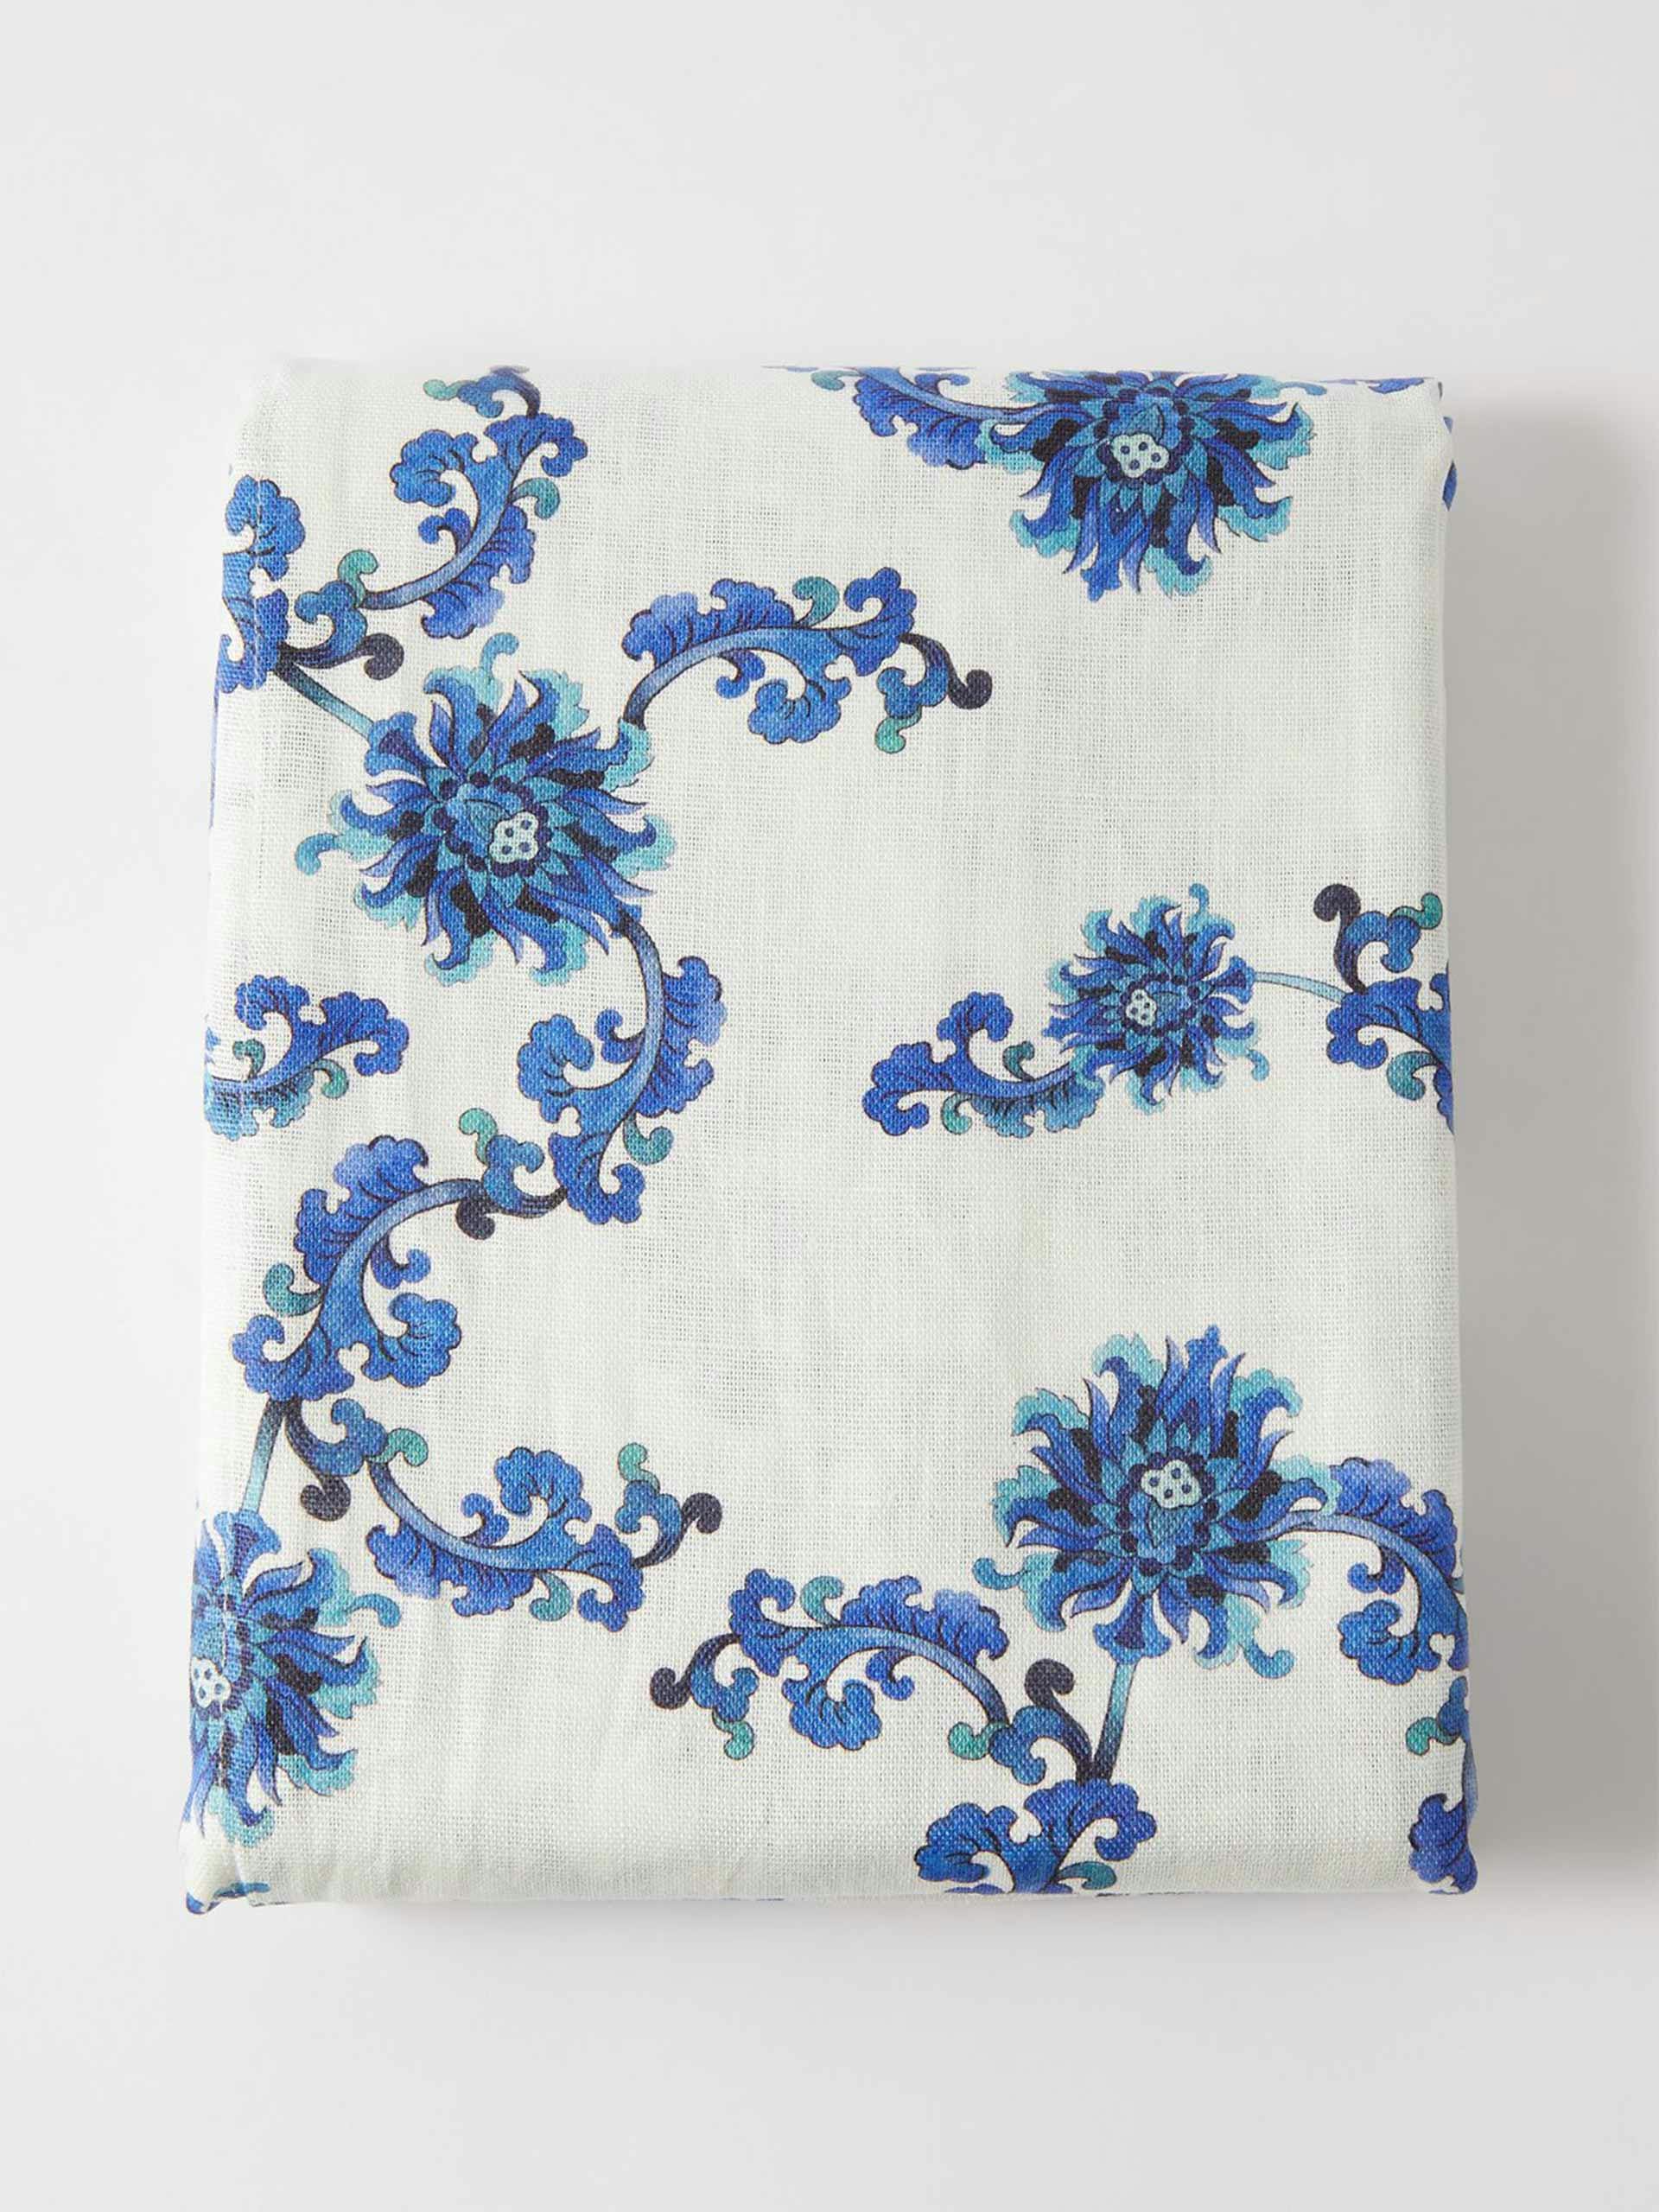 Blue and white floral print tablecloth